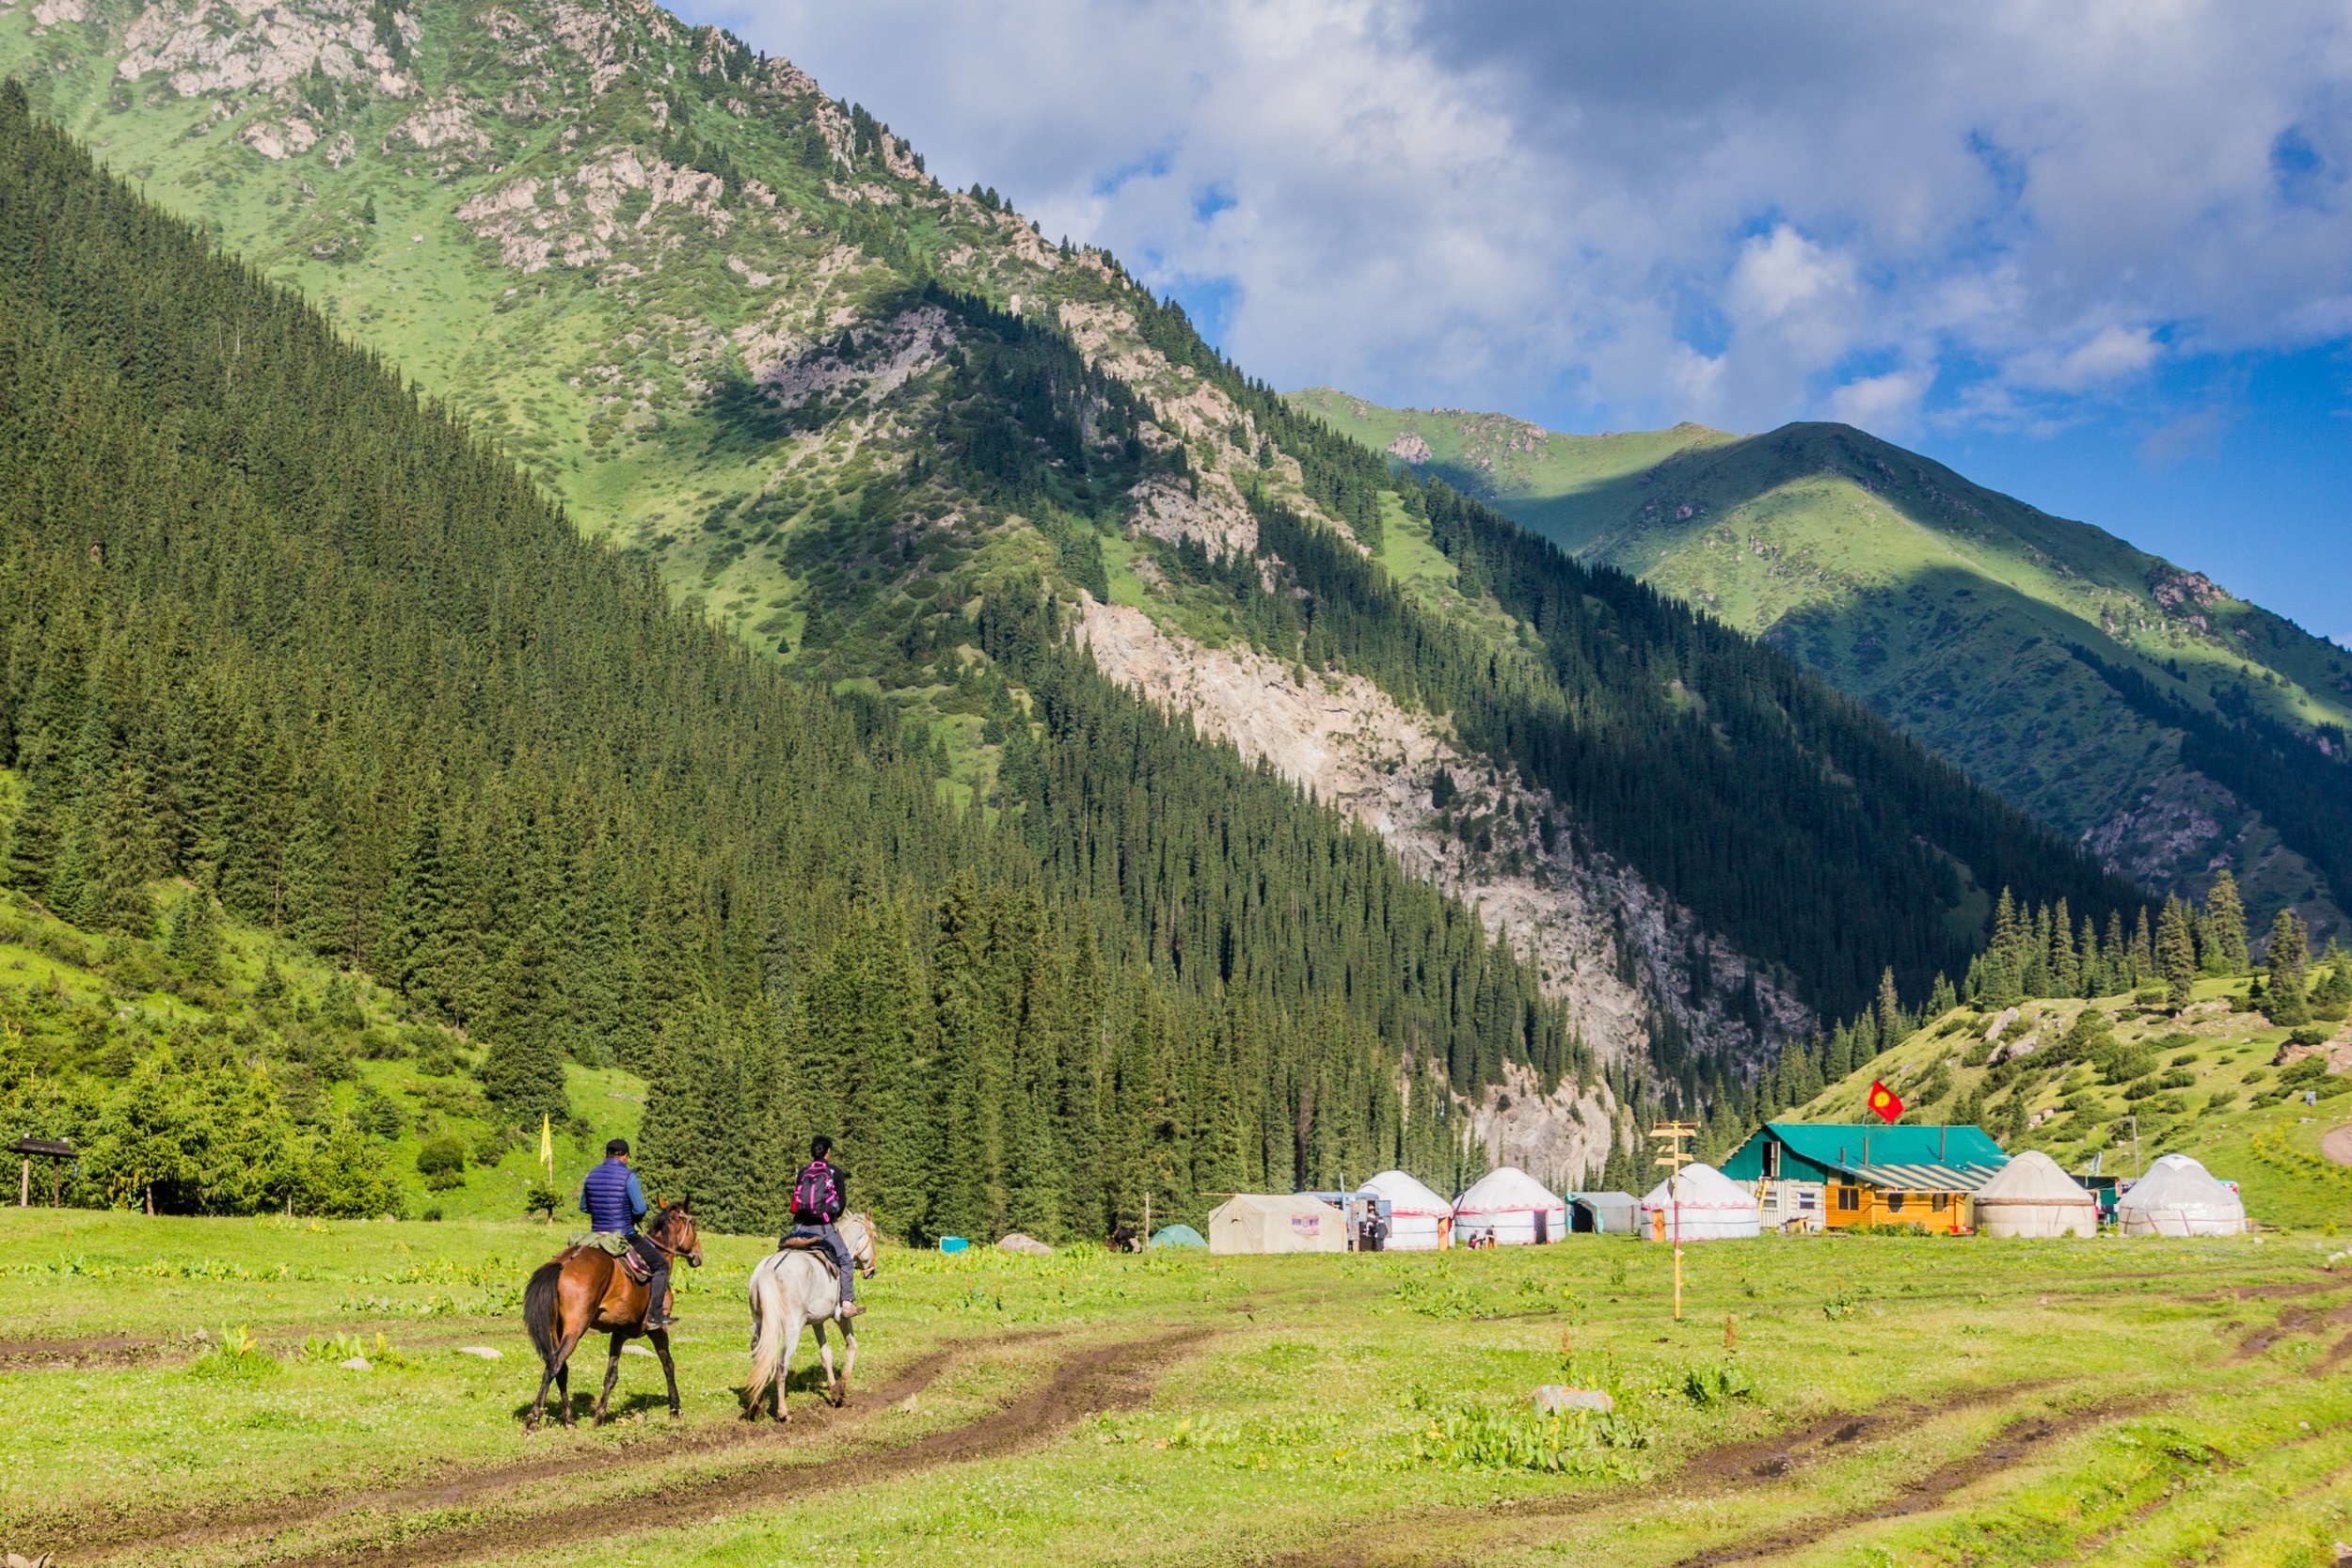 <p>Horse riding is a national pastime in Kyrgyzstan, and visitors are more than welcome to take part in it. Horse treks provide a sample of traditional nomadic life and are a great way to see the country's landscapes.</p><p>You may also like: <a href='https://www.yardbarker.com/lifestyle/articles/20_signs_that_youre_obviously_an_american_abroad/s1__39017233'>20 signs that you’re obviously an American abroad</a></p>